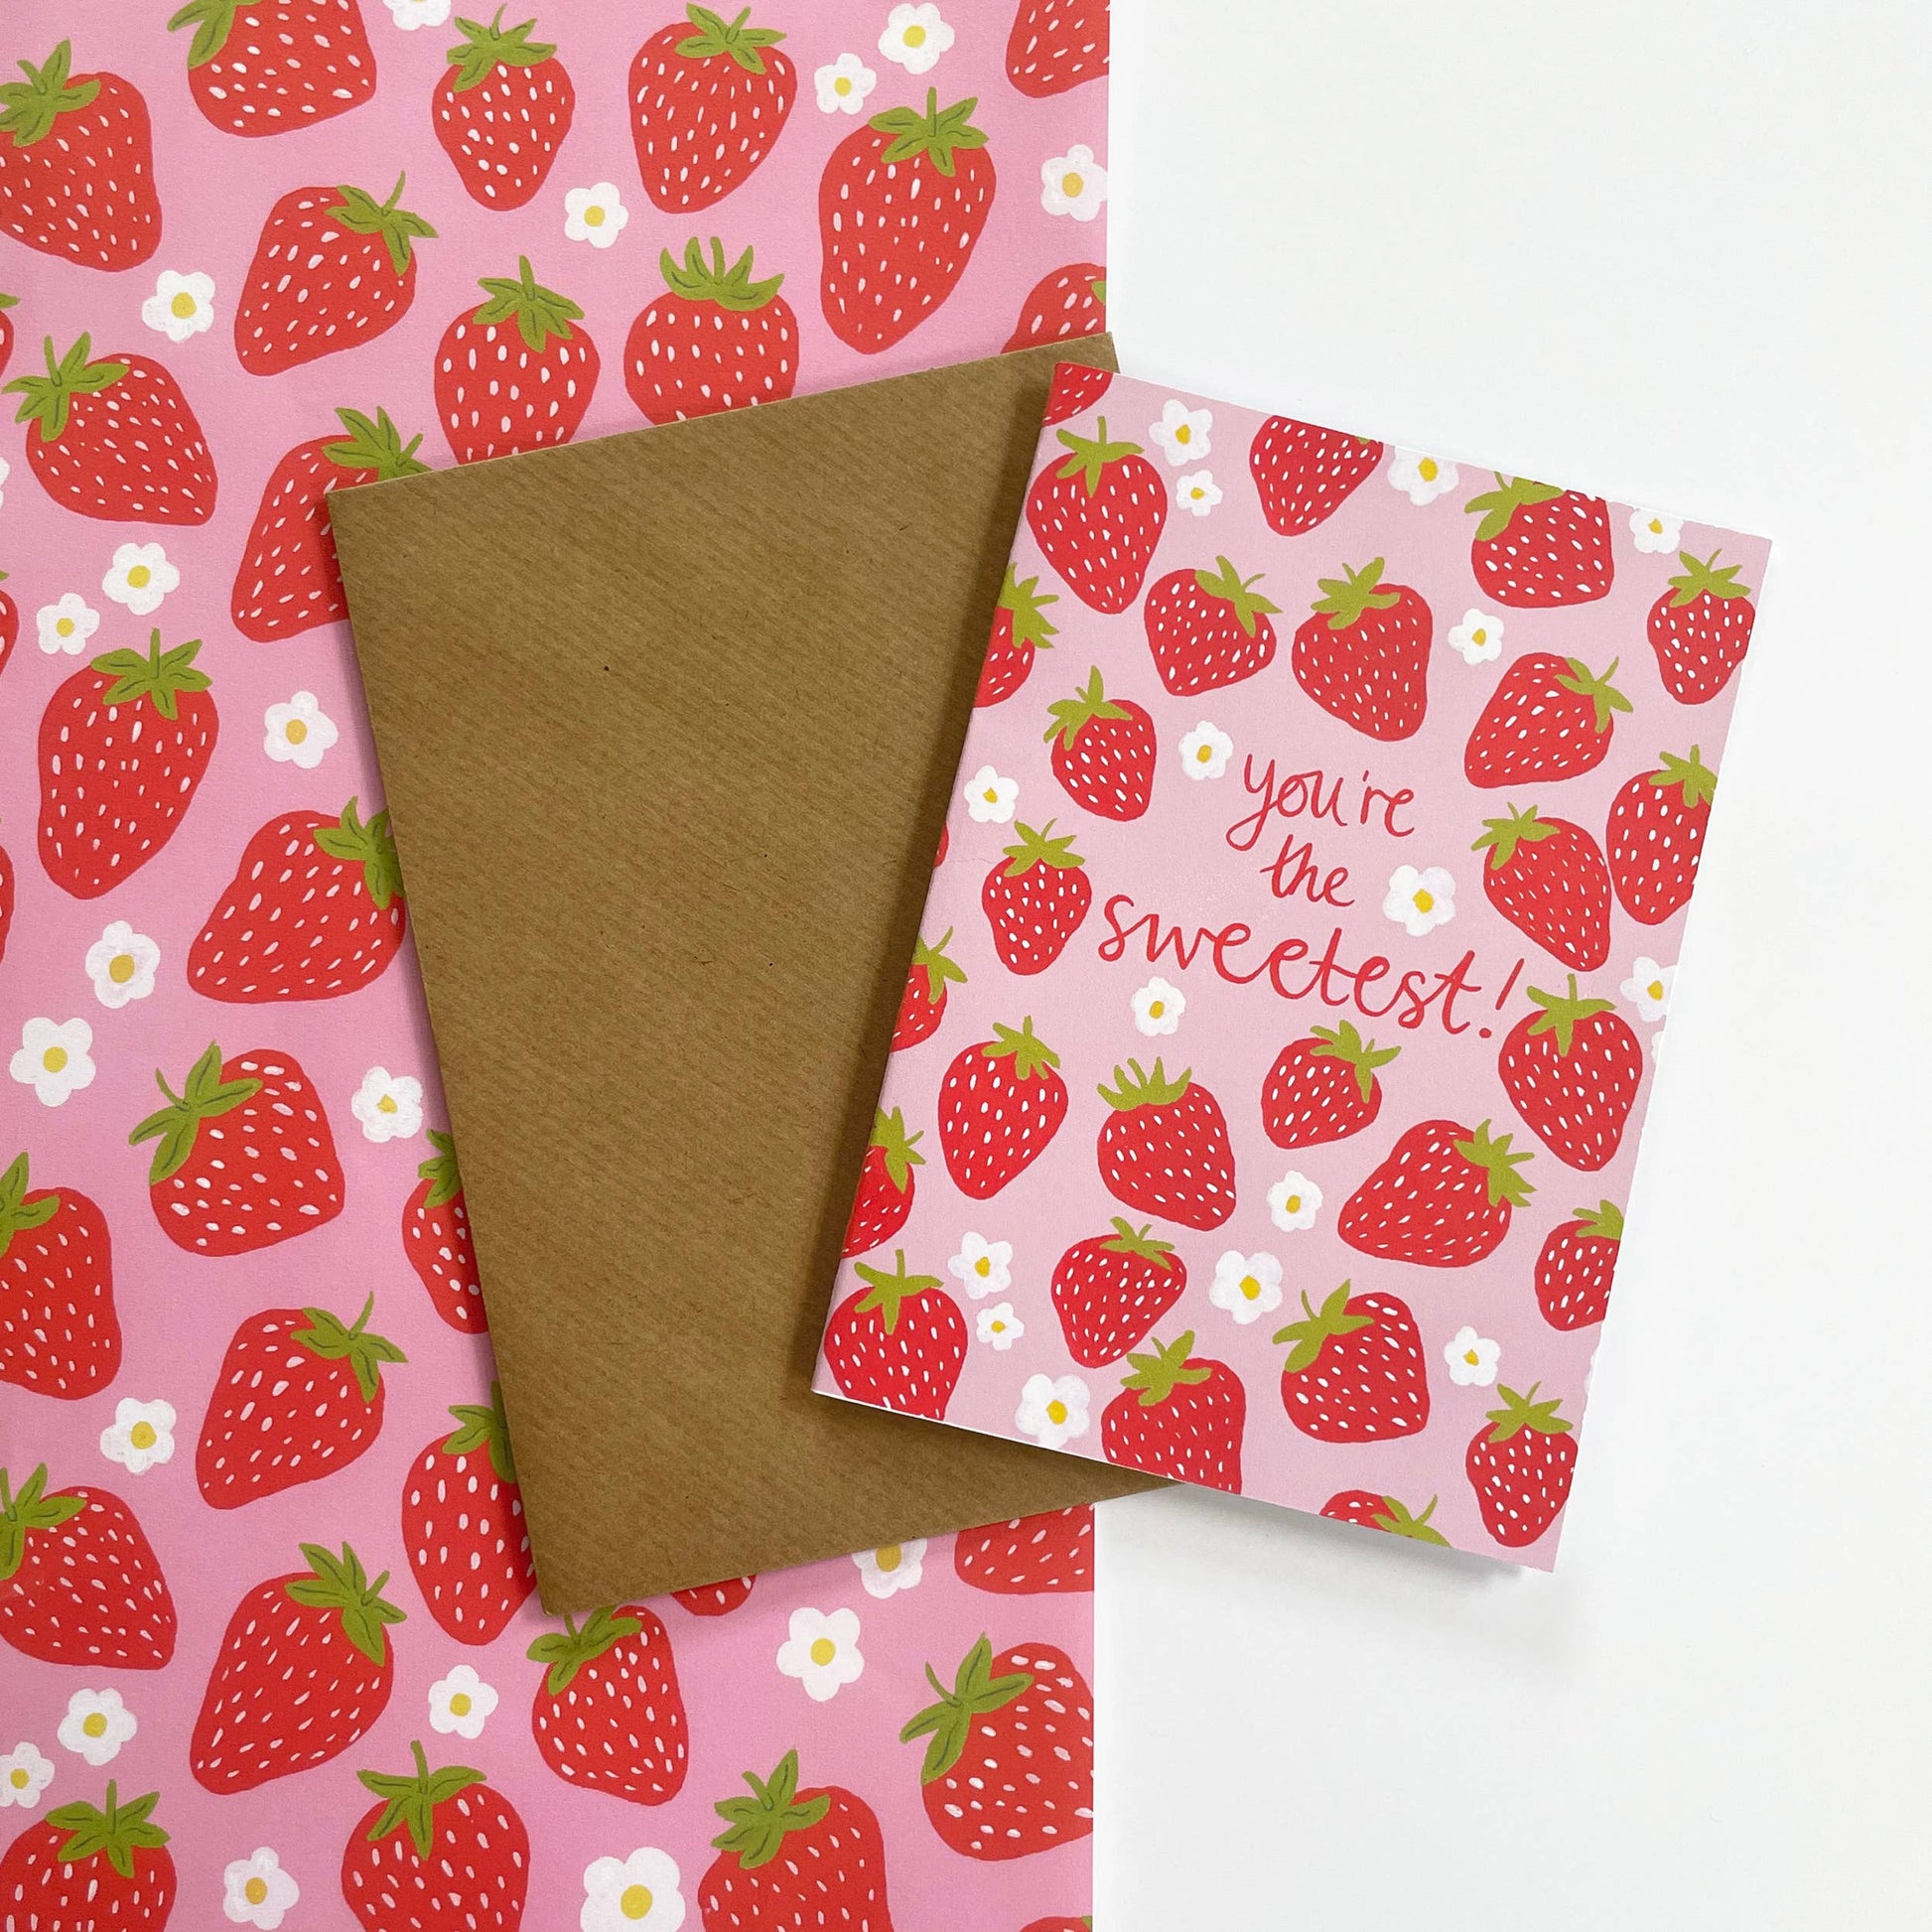 Strawberry wrapping paper + matching card that reads "You're the Sweetest"